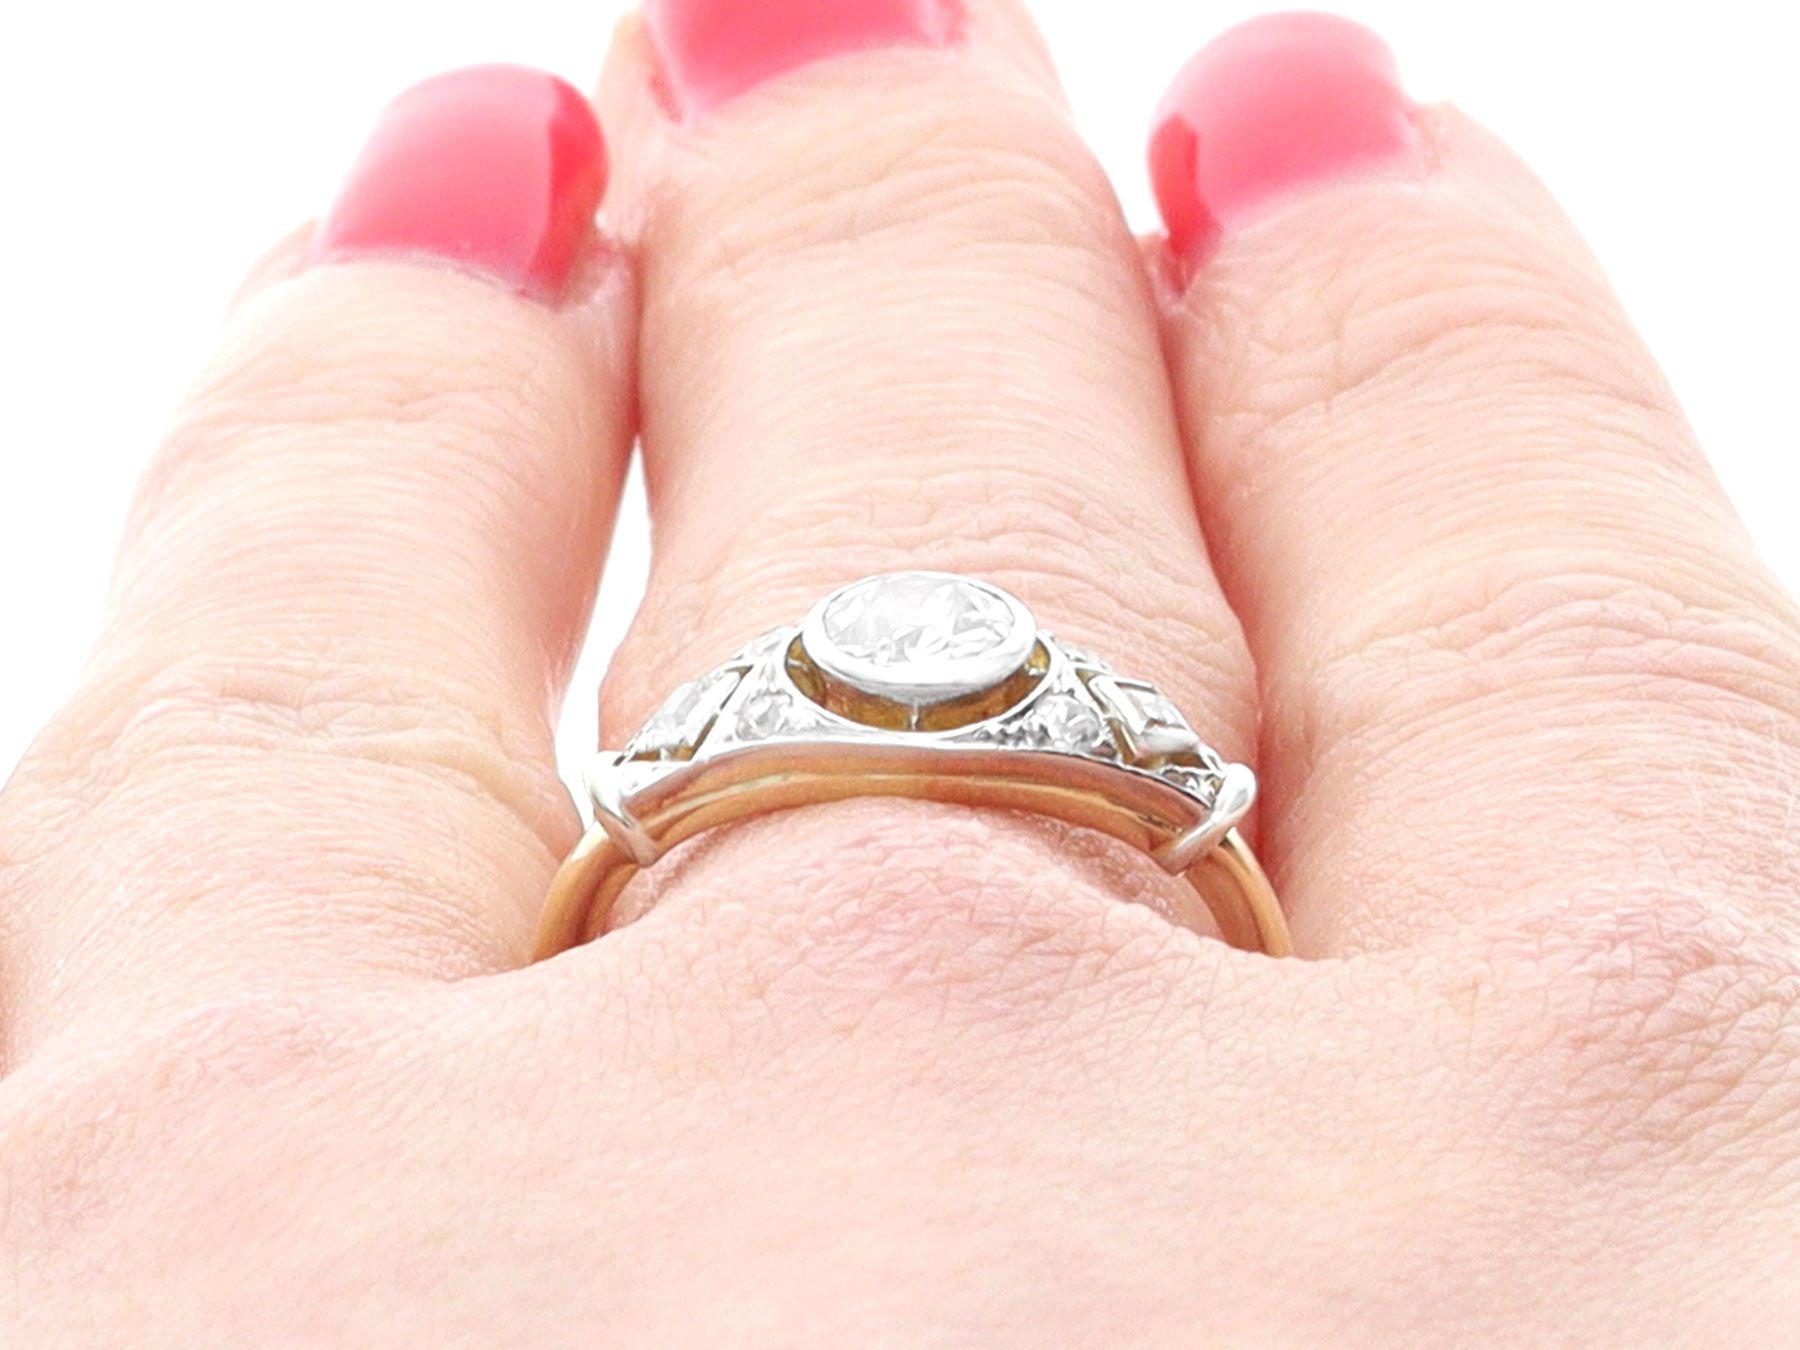 Antique 0.83 Carat Diamond and 18k Yellow Gold Solitaire Ring, Circa 1920s For Sale 3